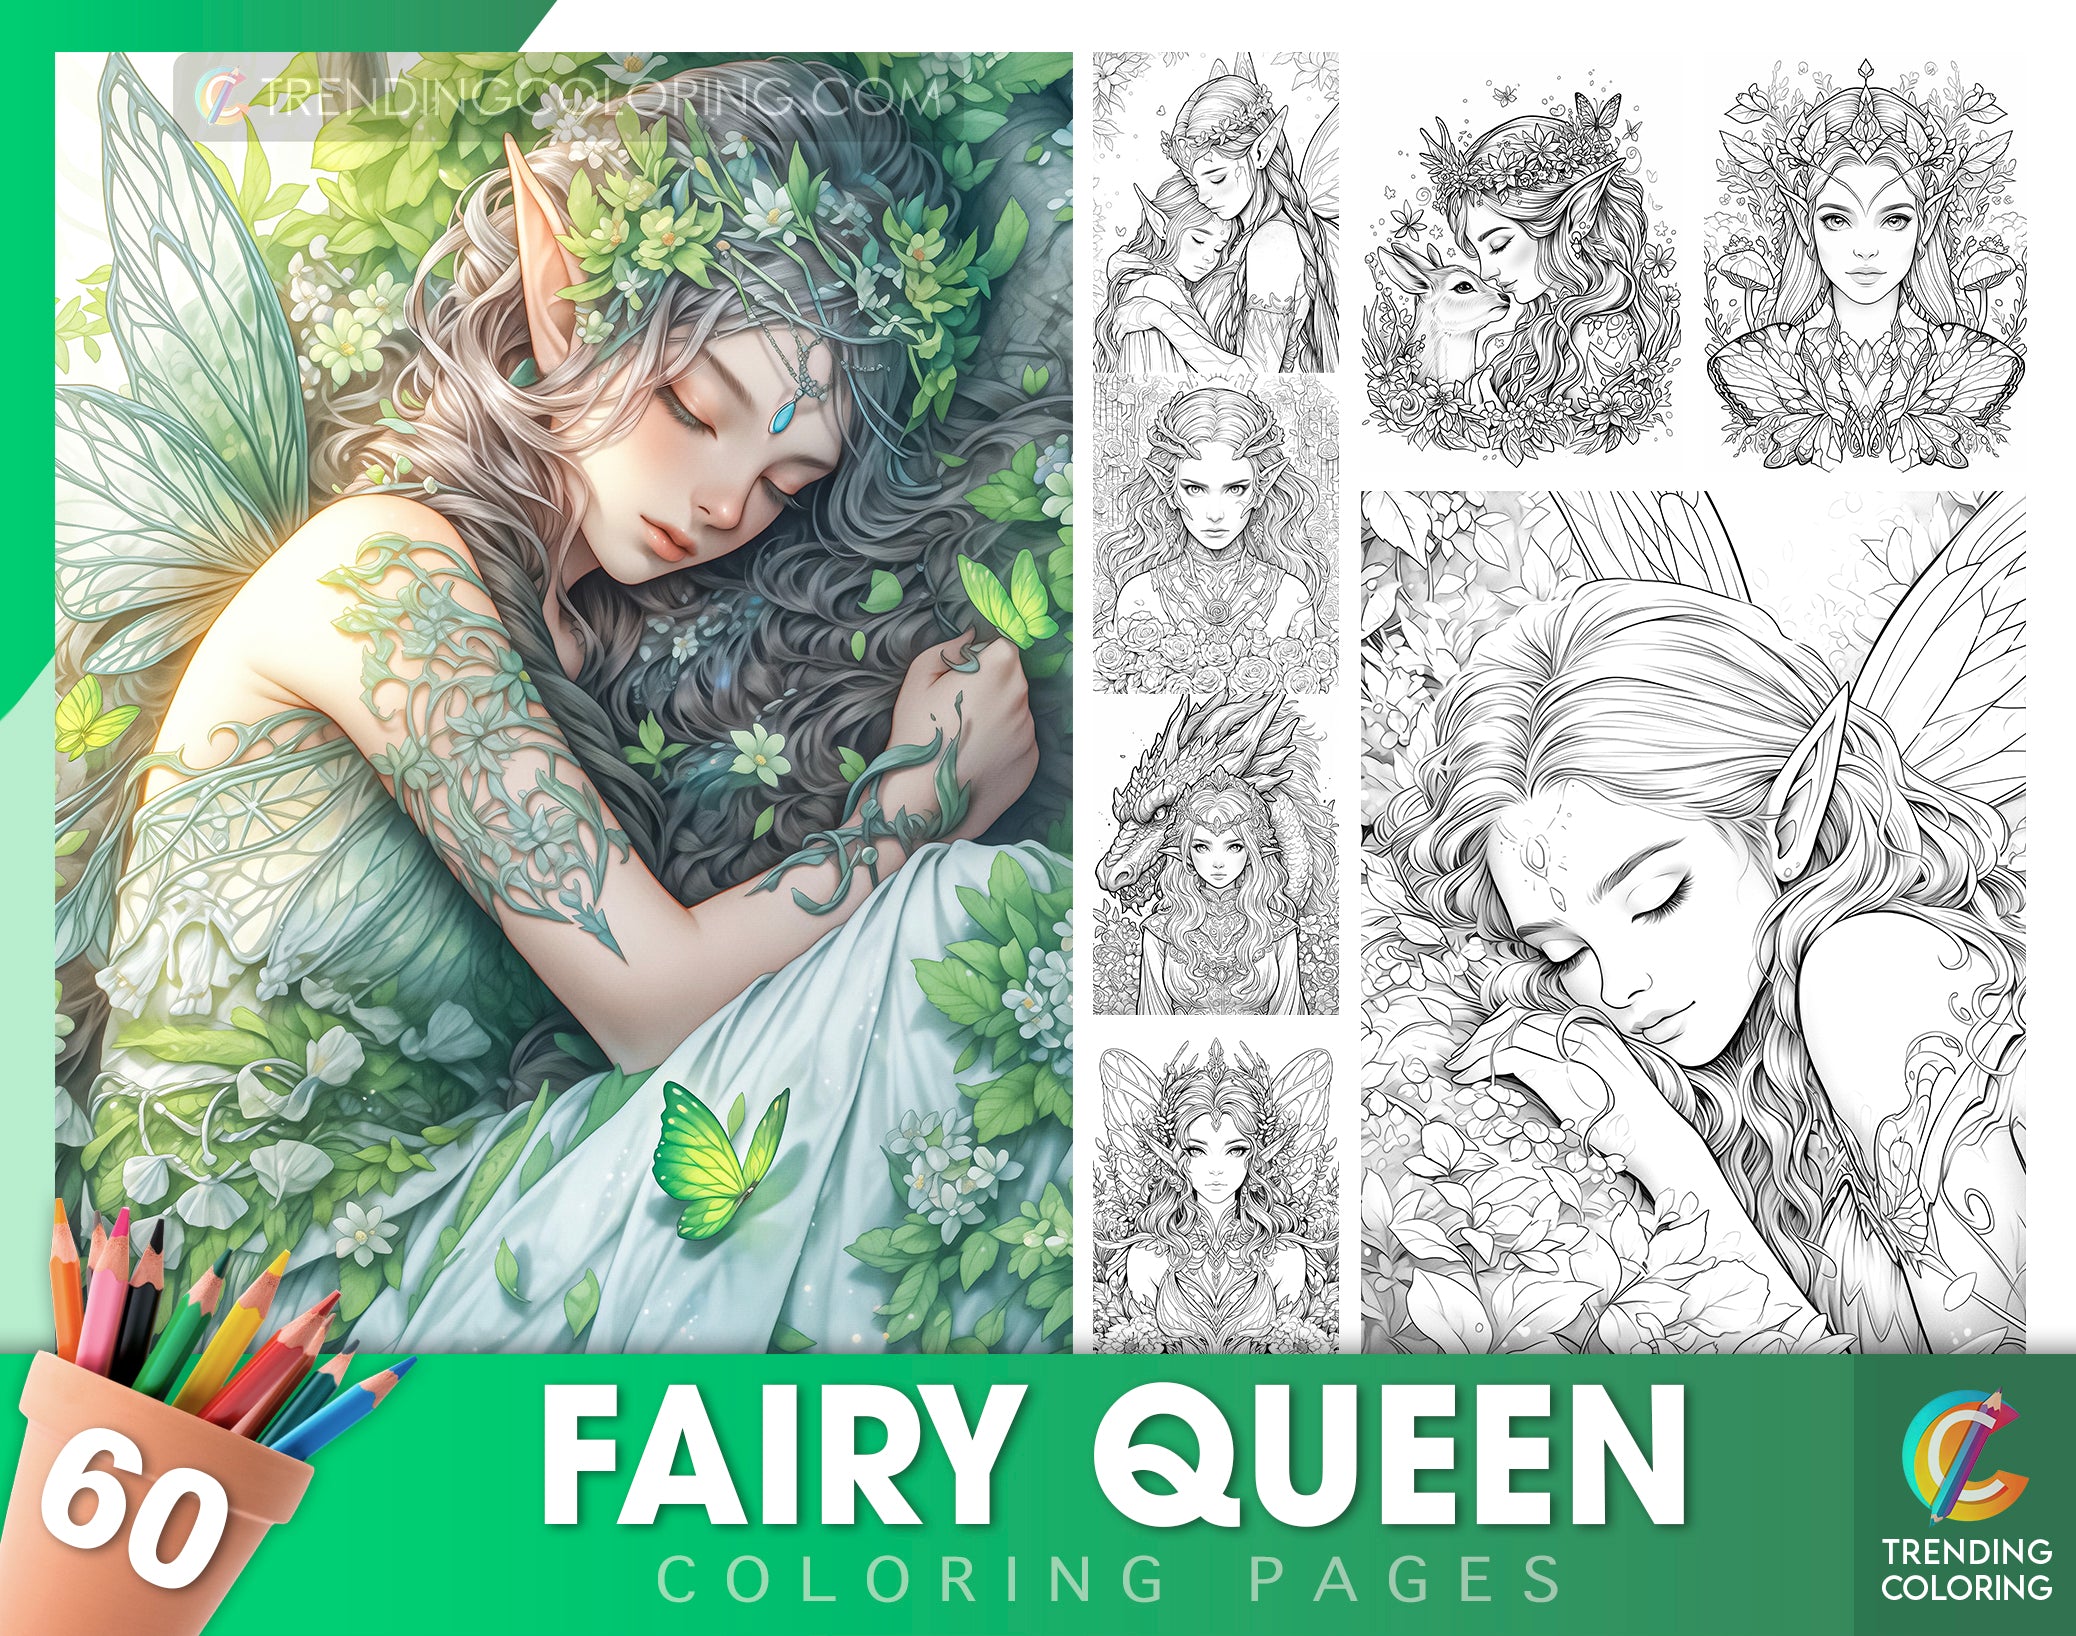 60 Fairy Queen Coloring Pages - Instant Download - Printable – Trending ...